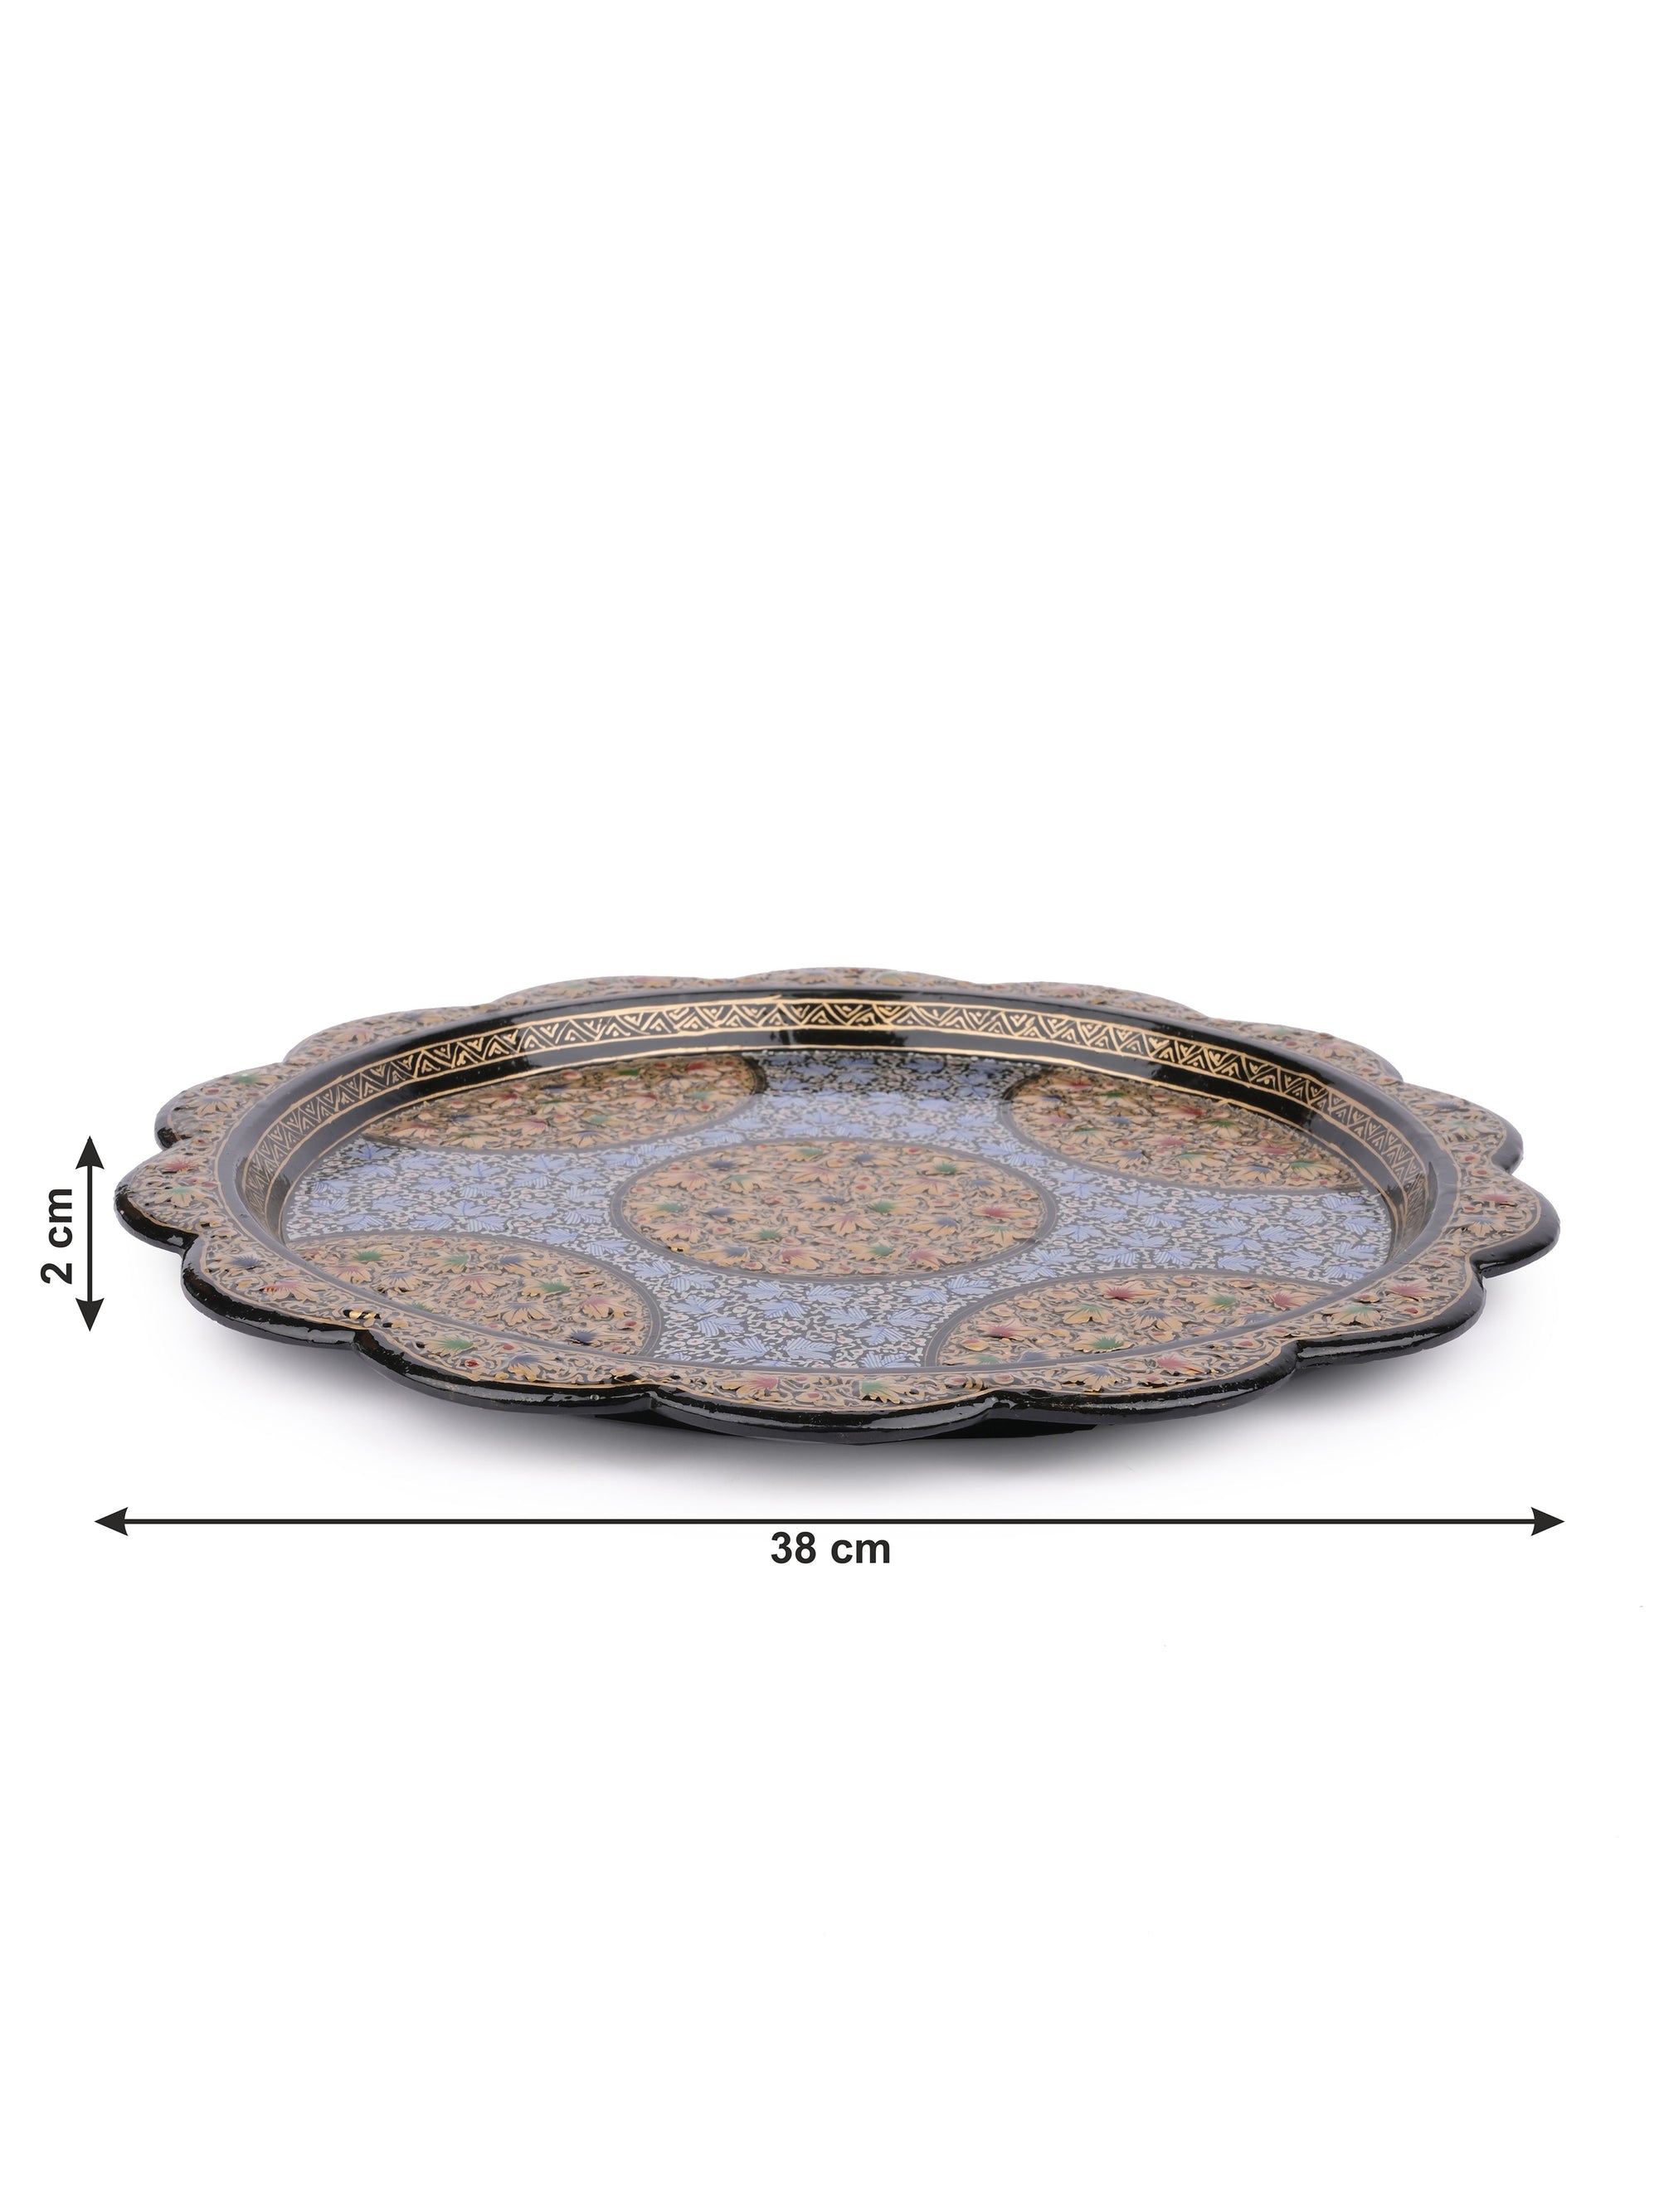 Paper Mache, Colorful Round Decorative Serving Tray without handle - The Heritage Artifacts